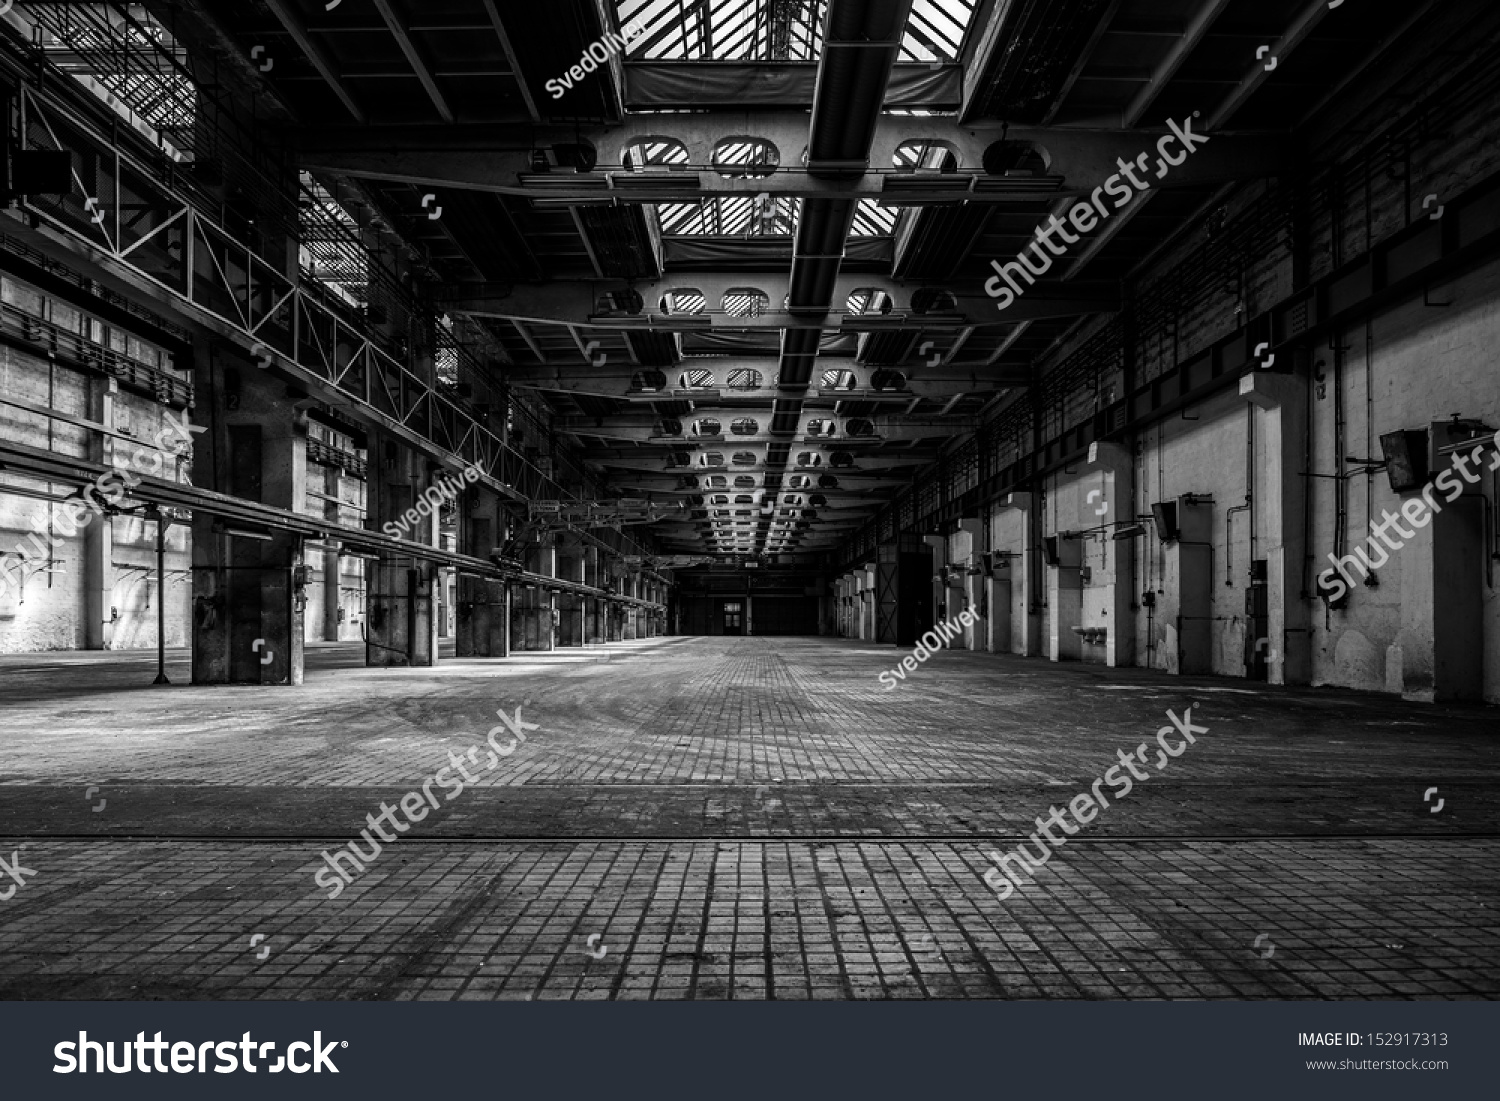 Industrial interior of an old factory building #152917313